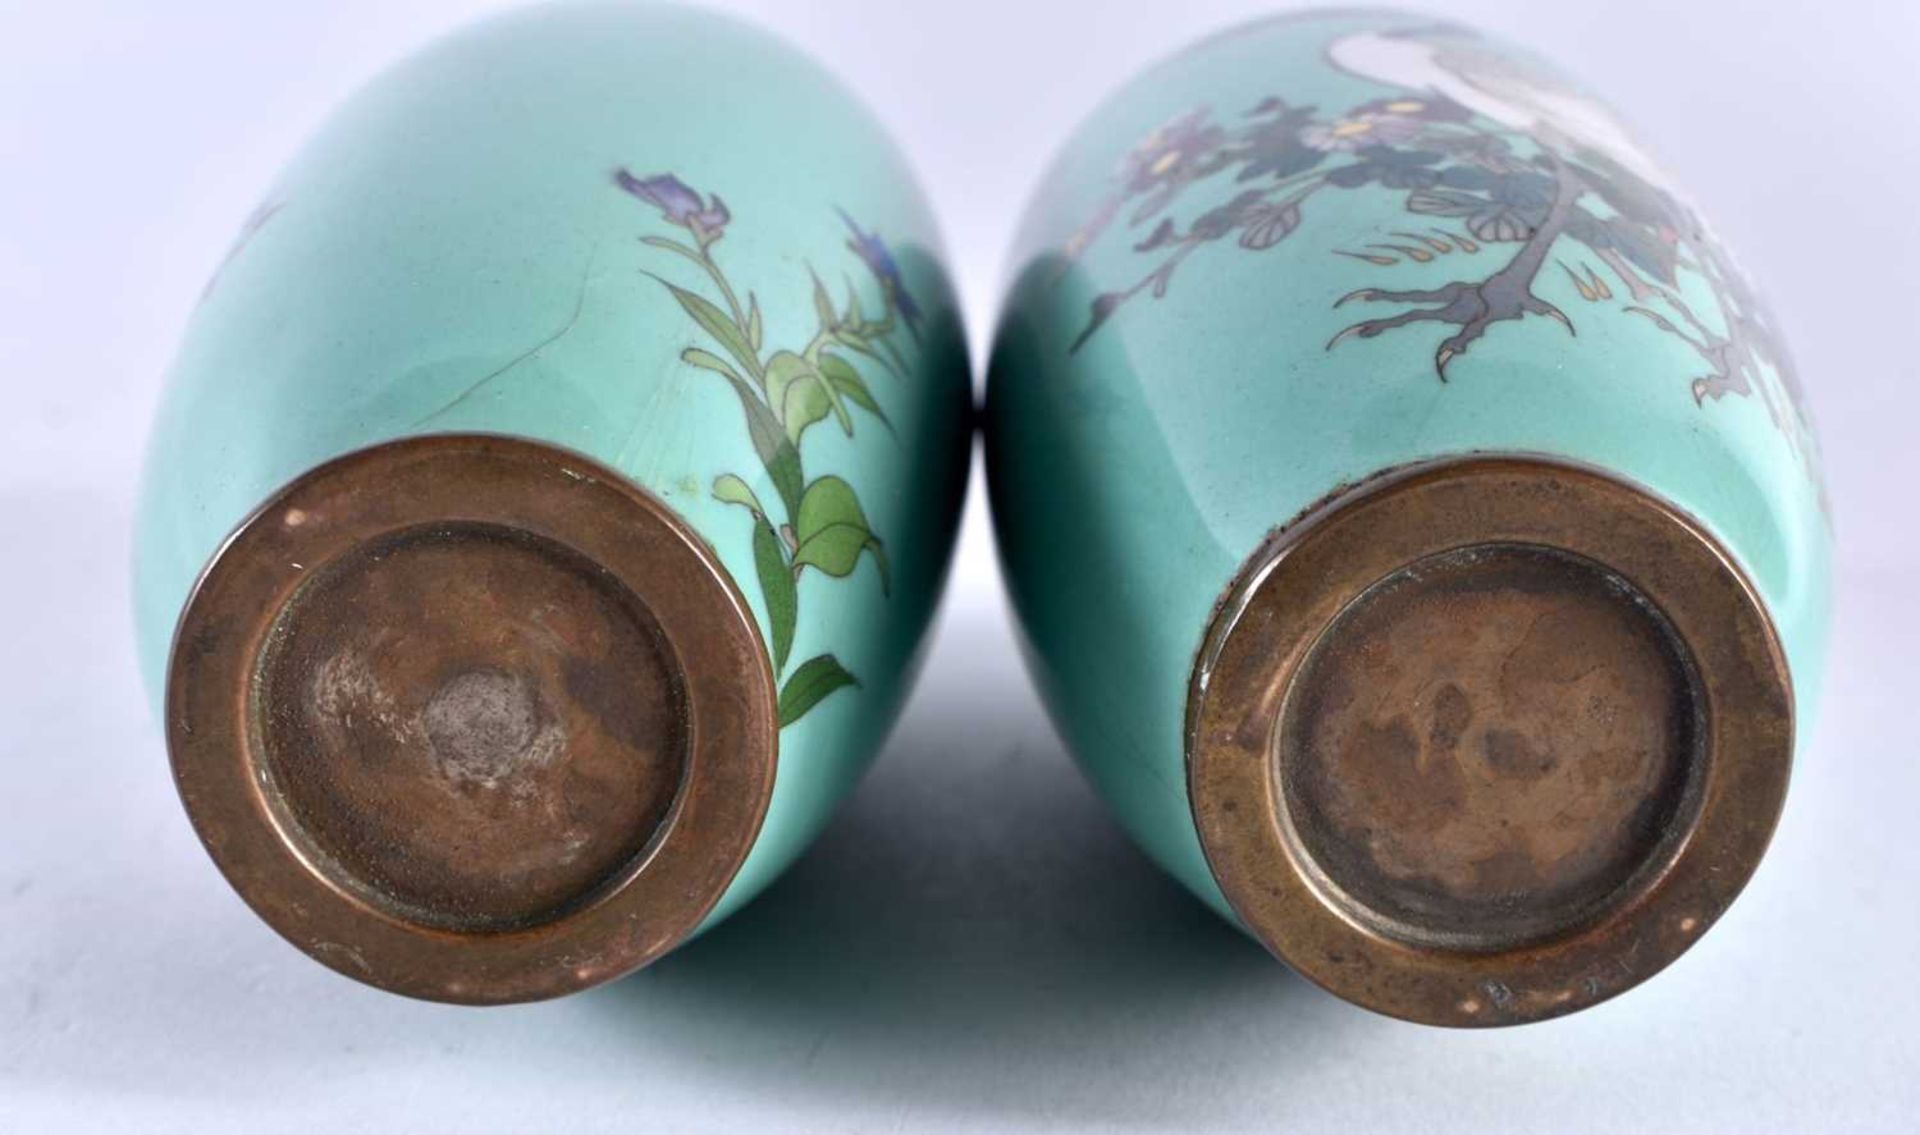 A PAIR OF 19TH CENTURY JAPANESE MEIJI PERIOD CLOISONNE ENAMEL VASES depicting birds in landscapes. - Image 5 of 5